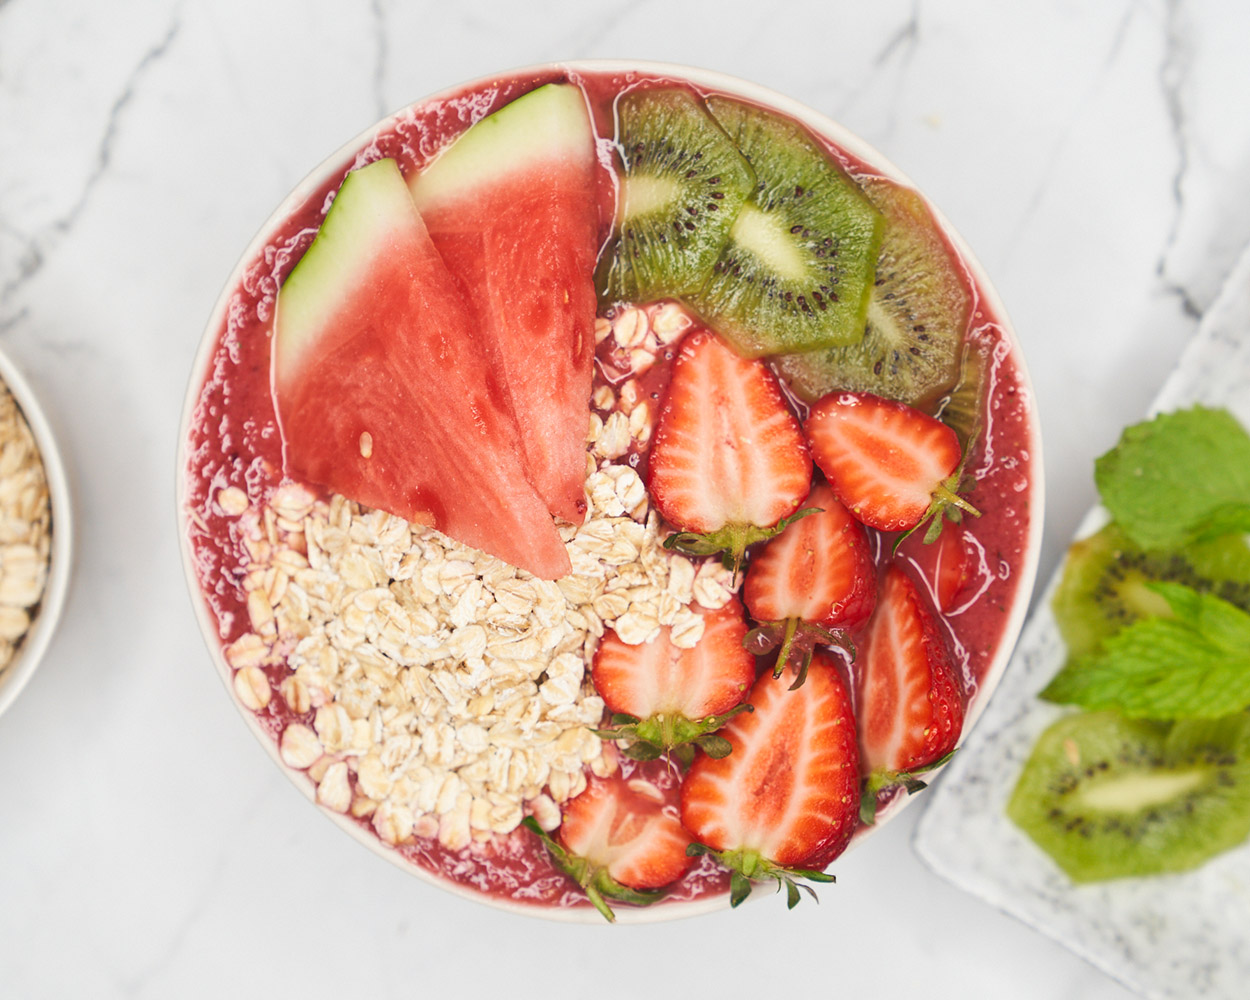 Australian Organic Food Co Berry Bowl Smoothie with Strawberries, Kiwi and Watermelon